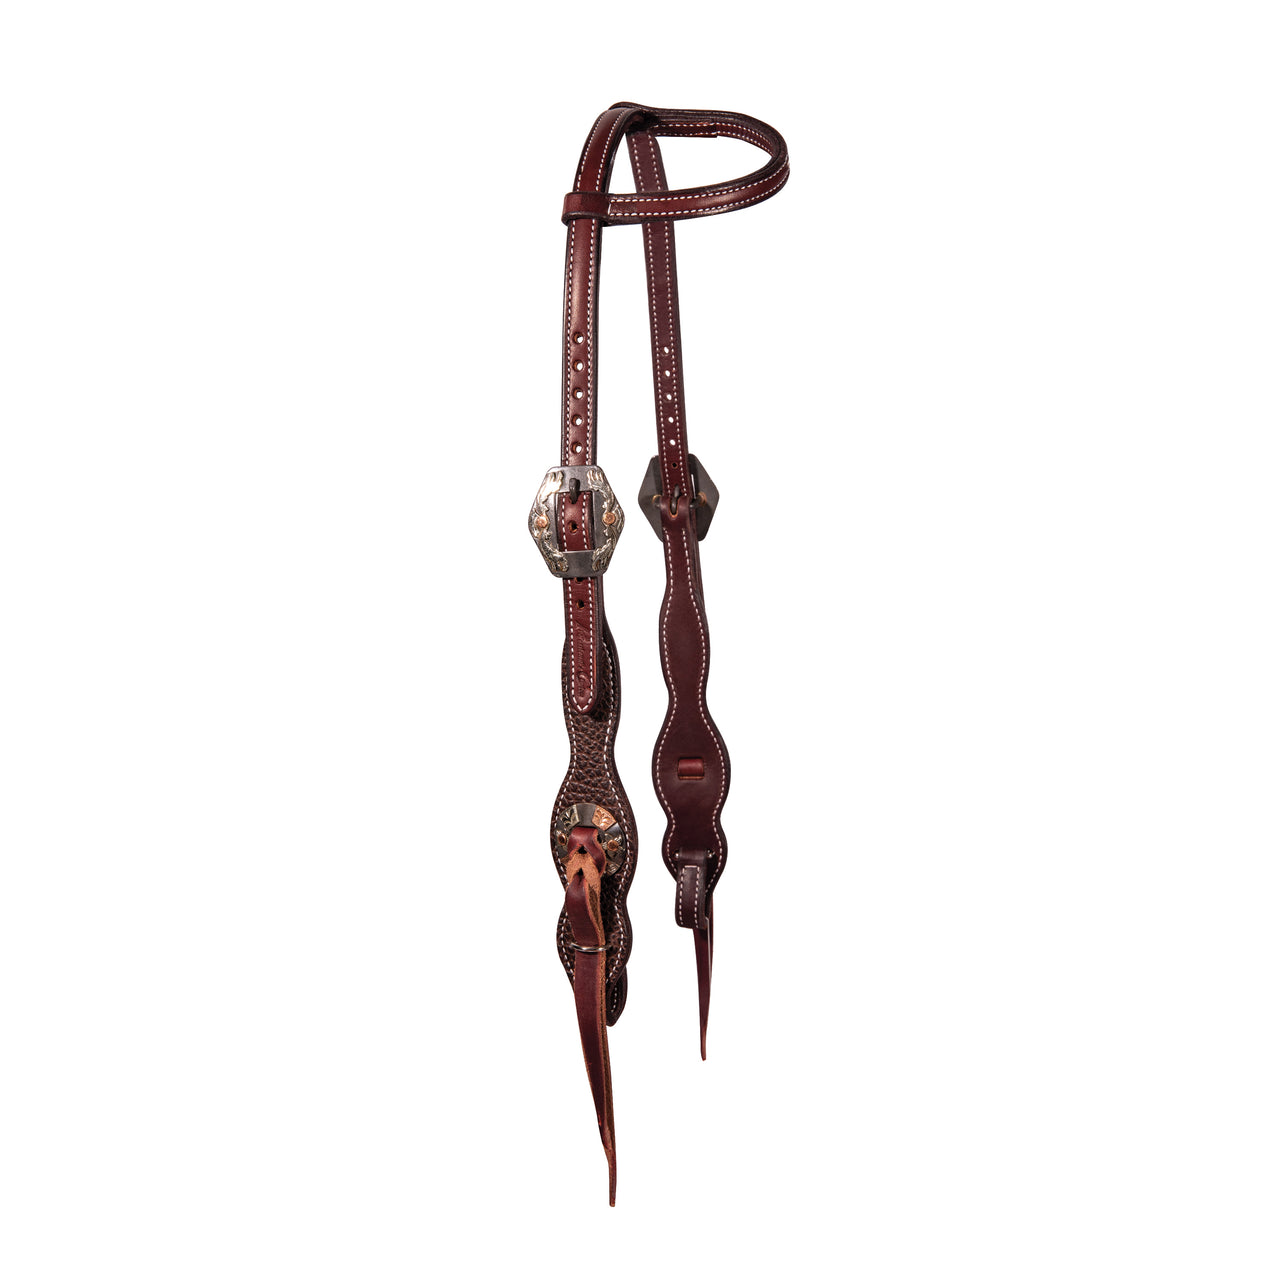 Professional's Choice 1 Ear Quick Change Headstall - Bison